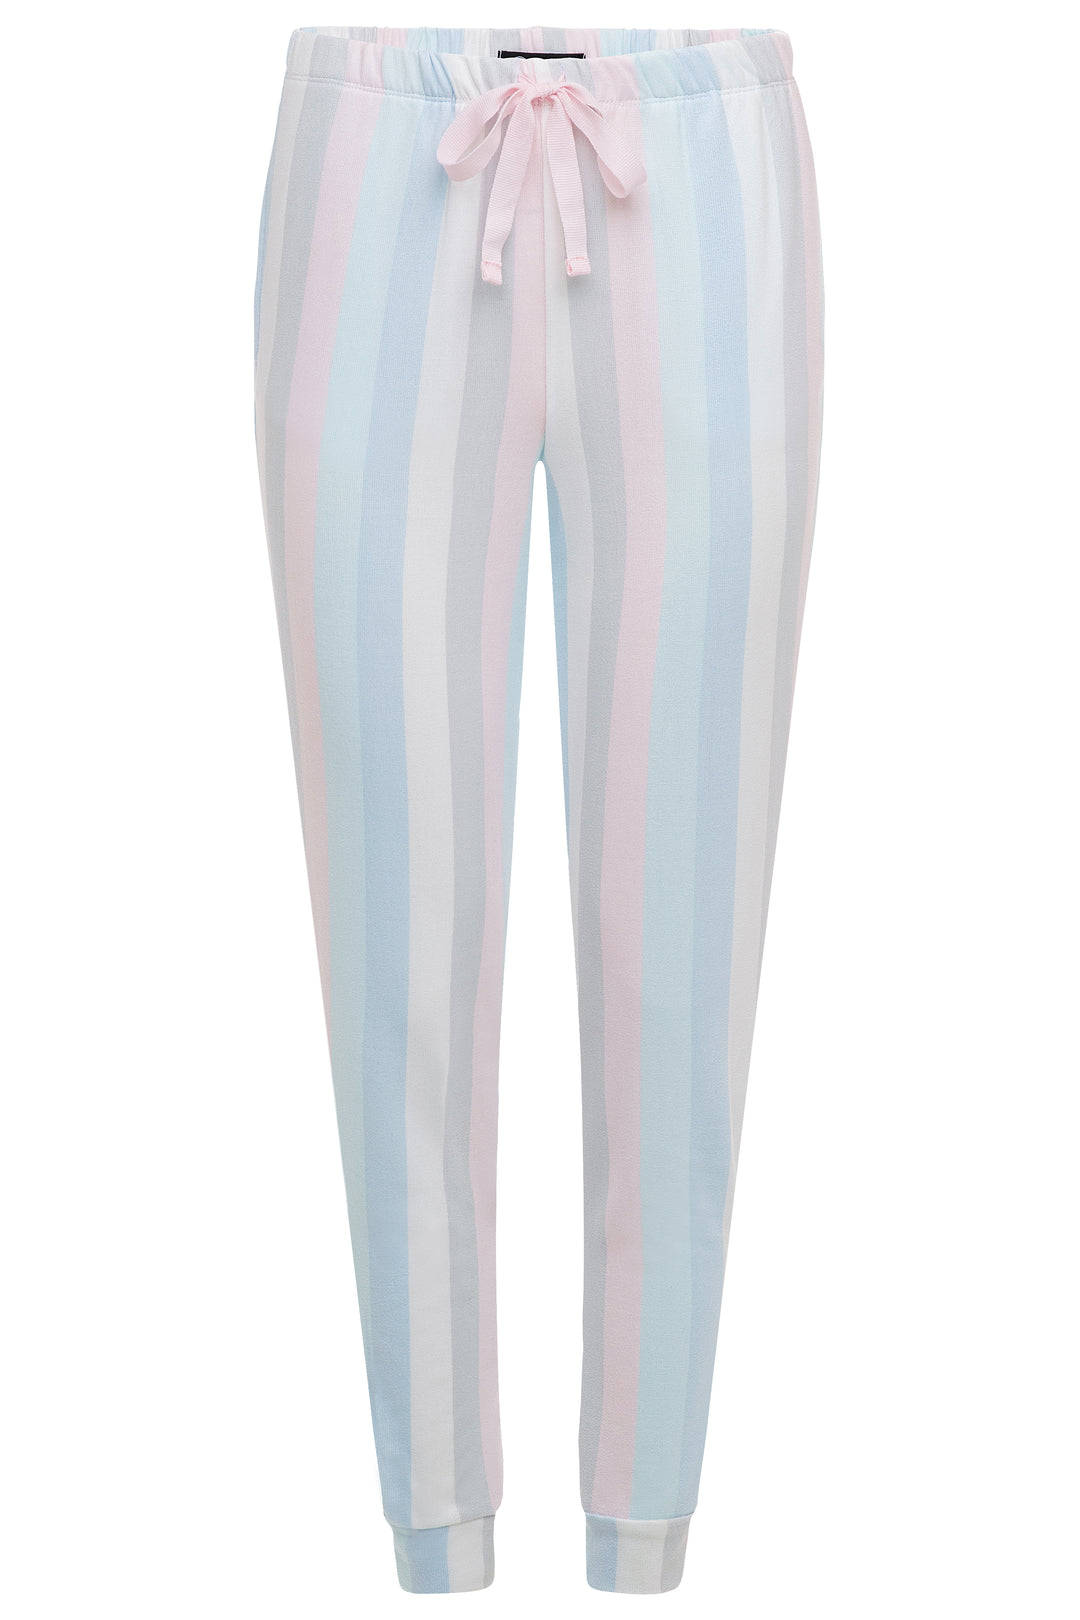 Pink and blue stripes patterned pants as part of the 2 Pack René Rofé Lightweight Hacci Jogger Pajama Pants in Pink and Blue Stripes pattern